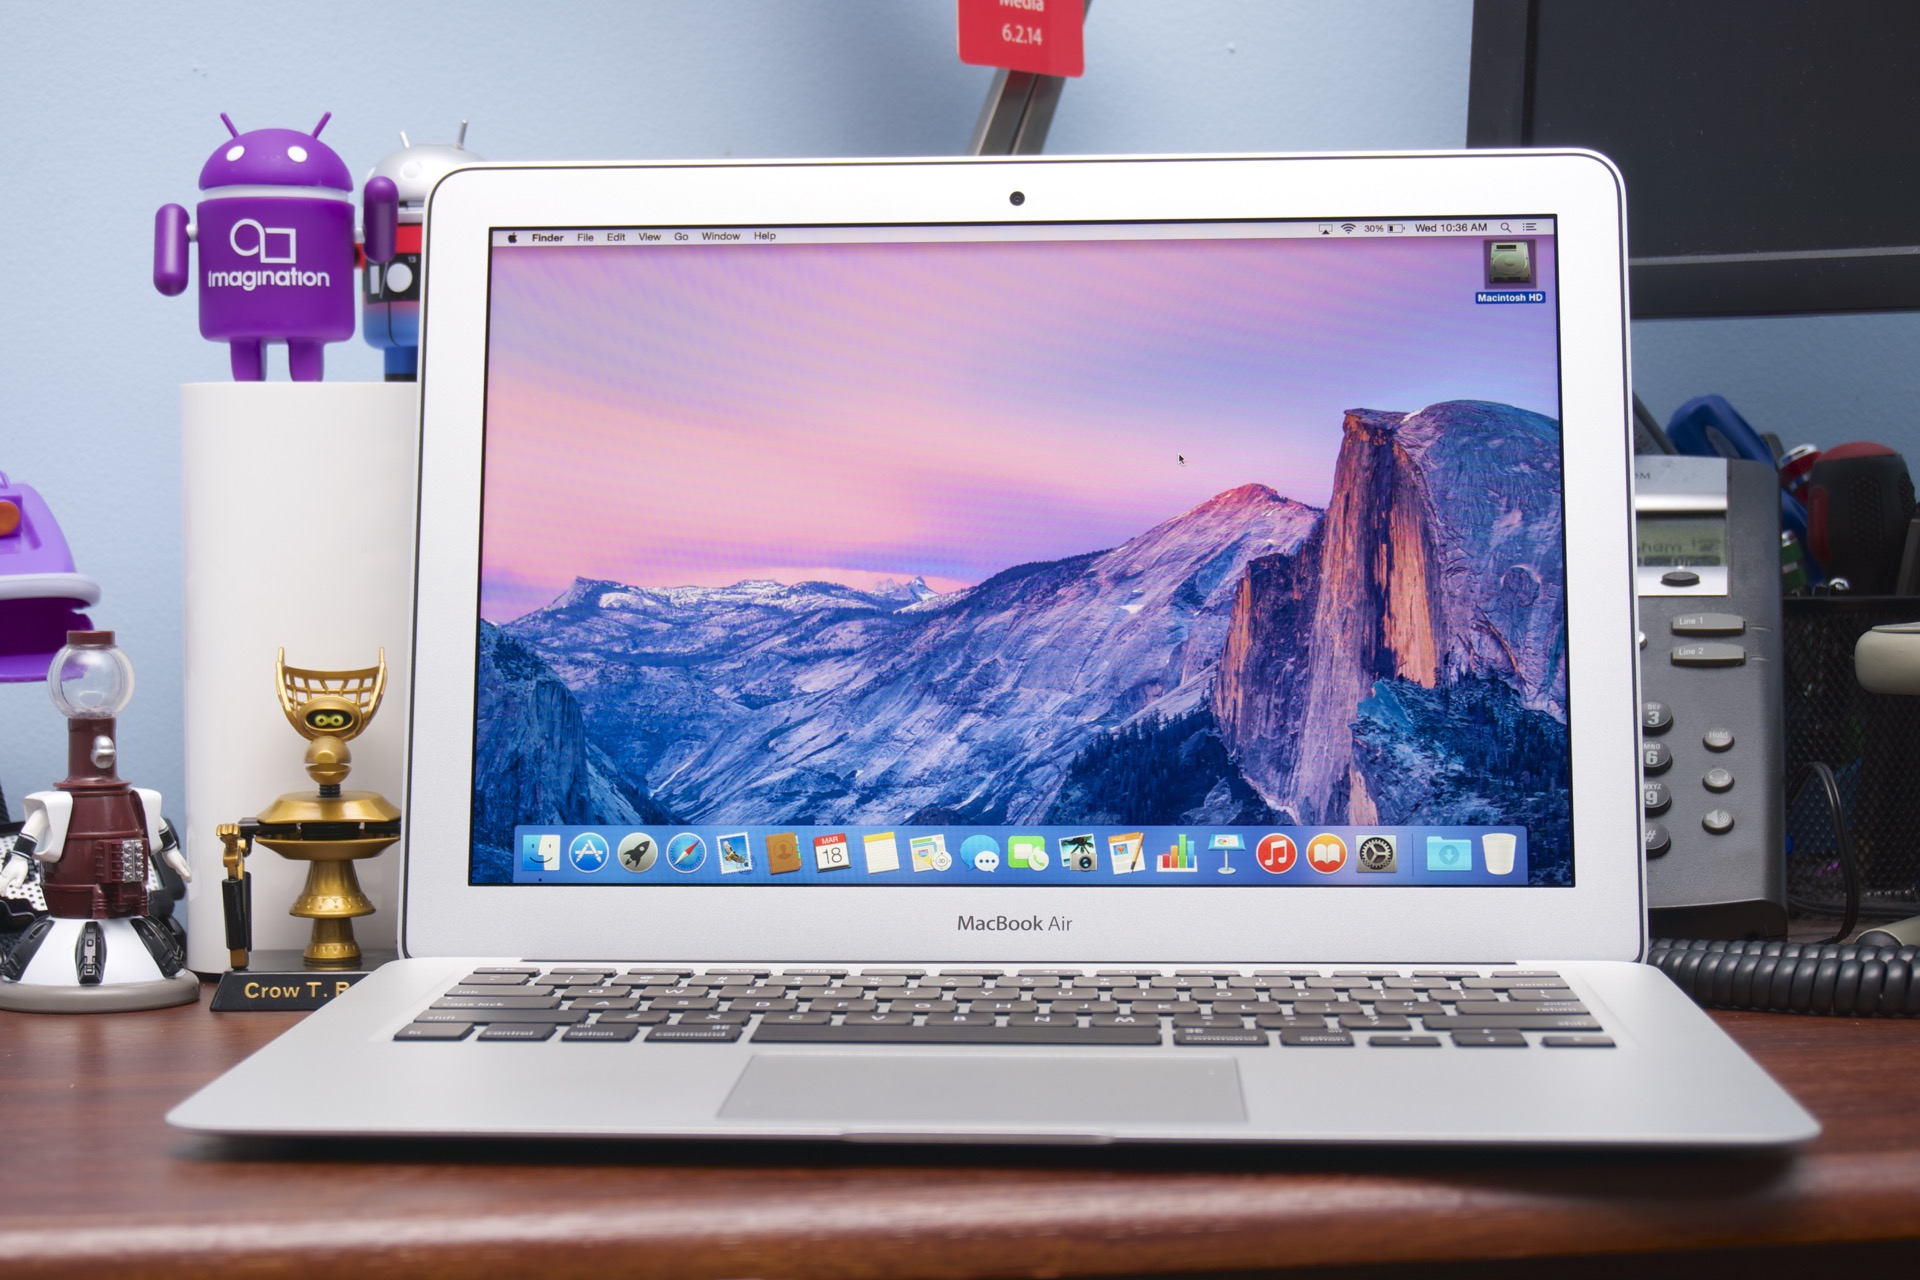 Review: The 2015 MacBook Air's once-trailblazing design is showing 